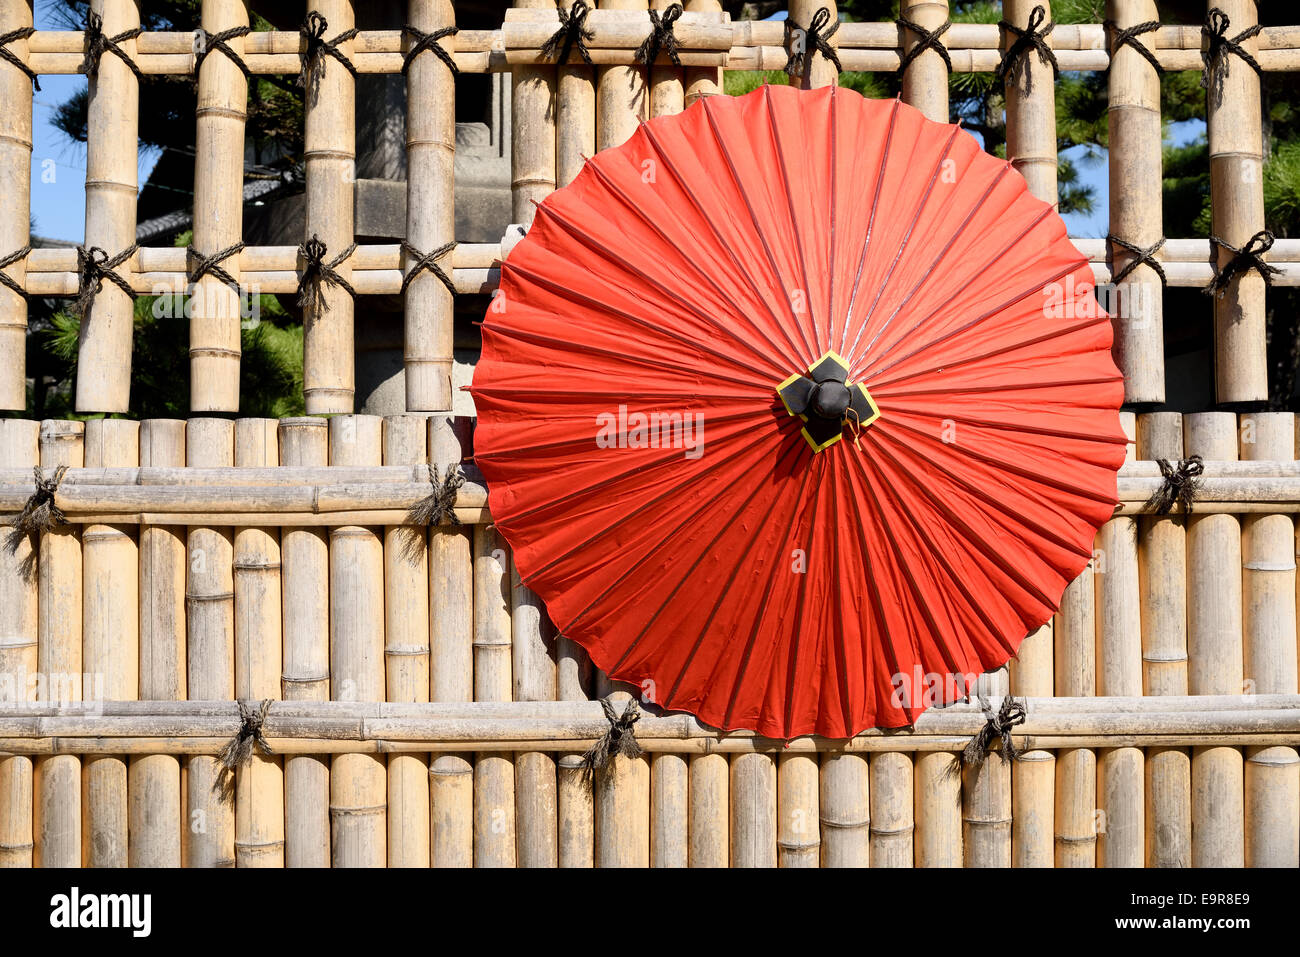 Japanese traditional red umbrella with bamboo fence Stock Photo